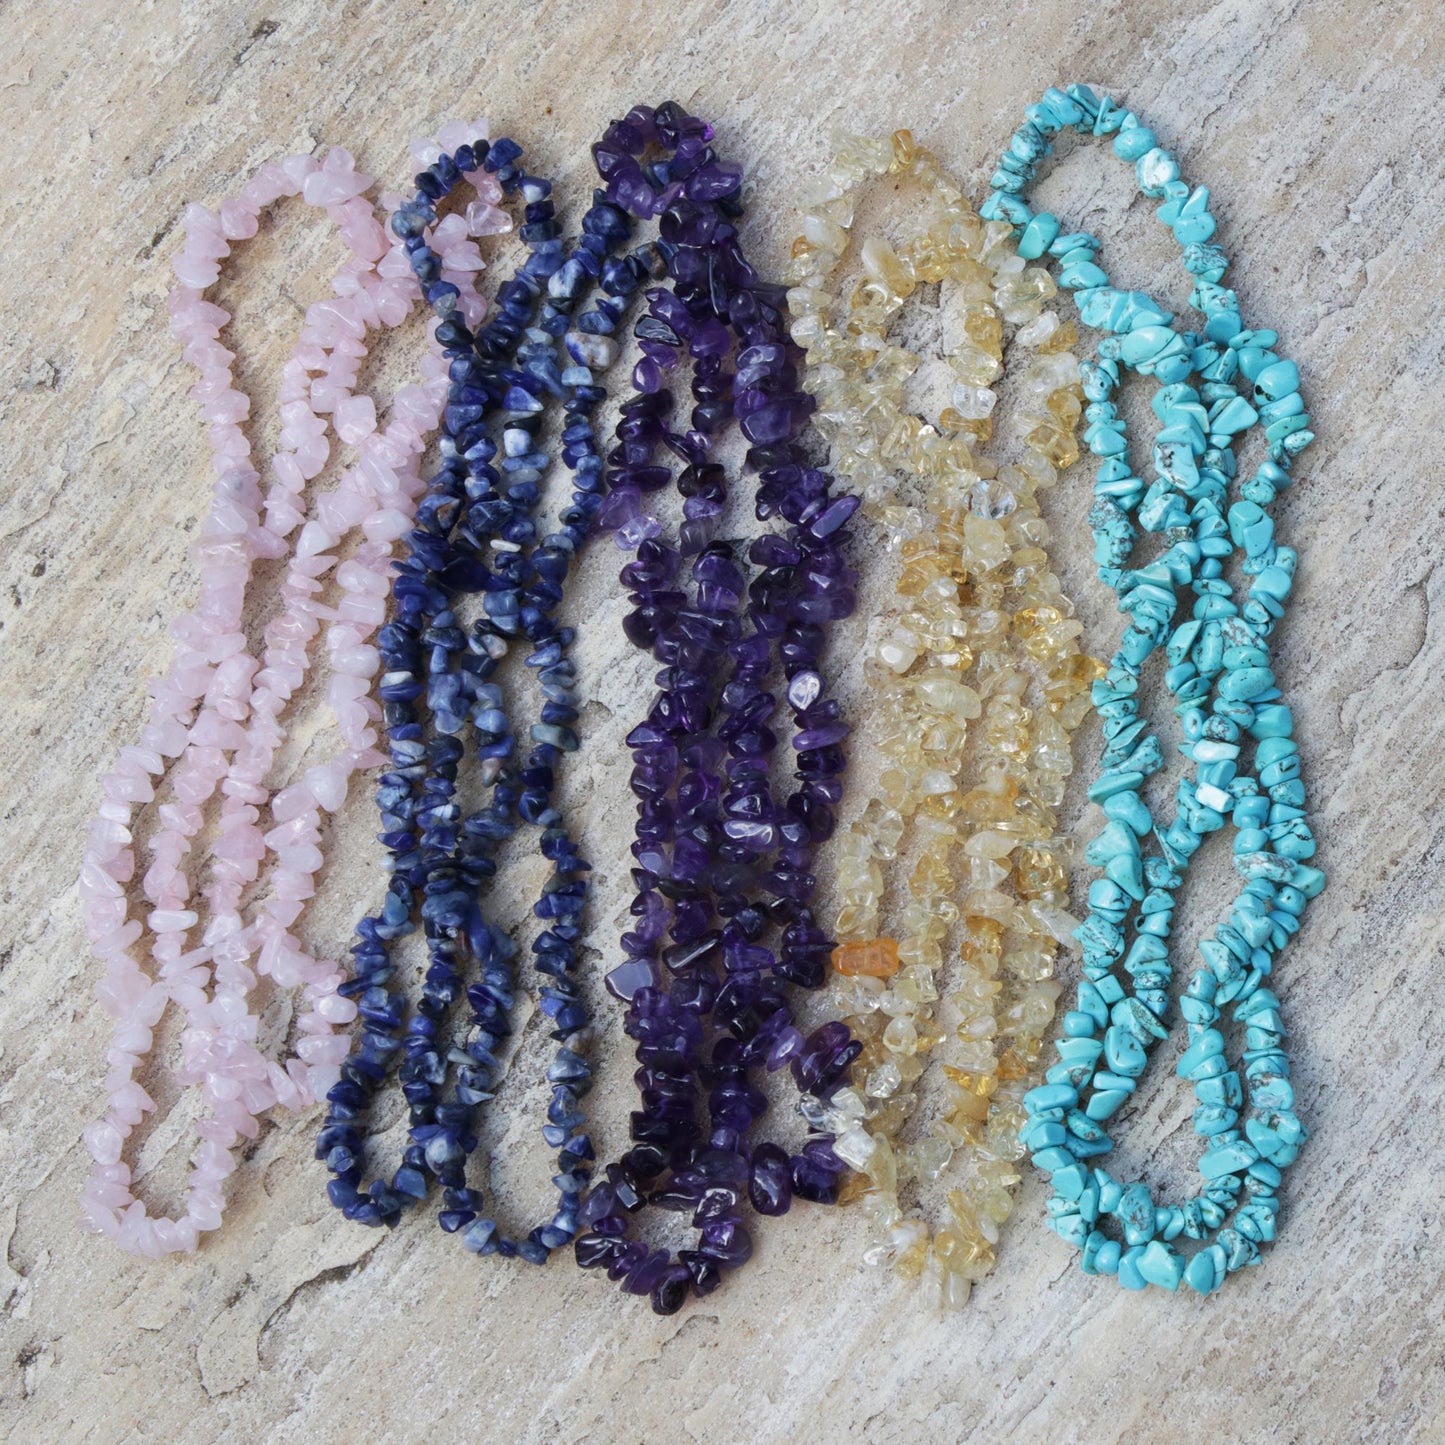 Five Graces Gemstone Beaded Necklaces (Set of 5) from Brazil